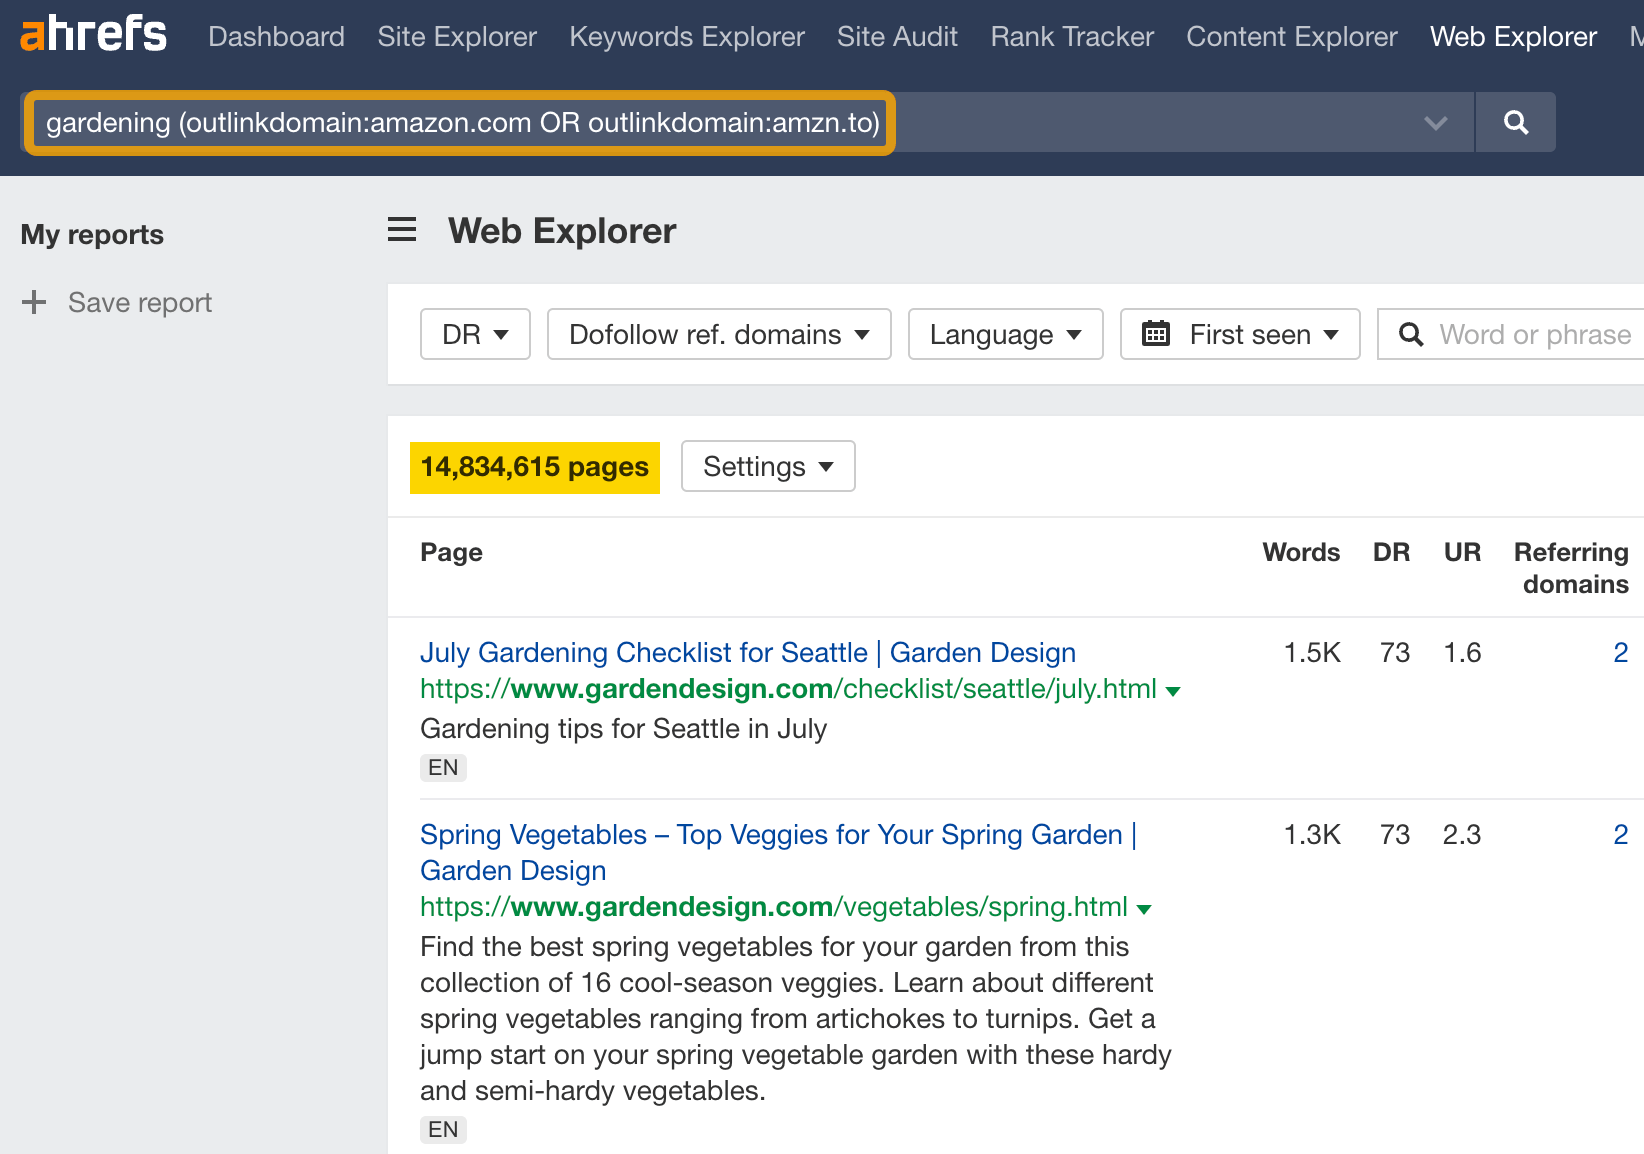 Filters for finding pages that link to Amazon affiliate URLs